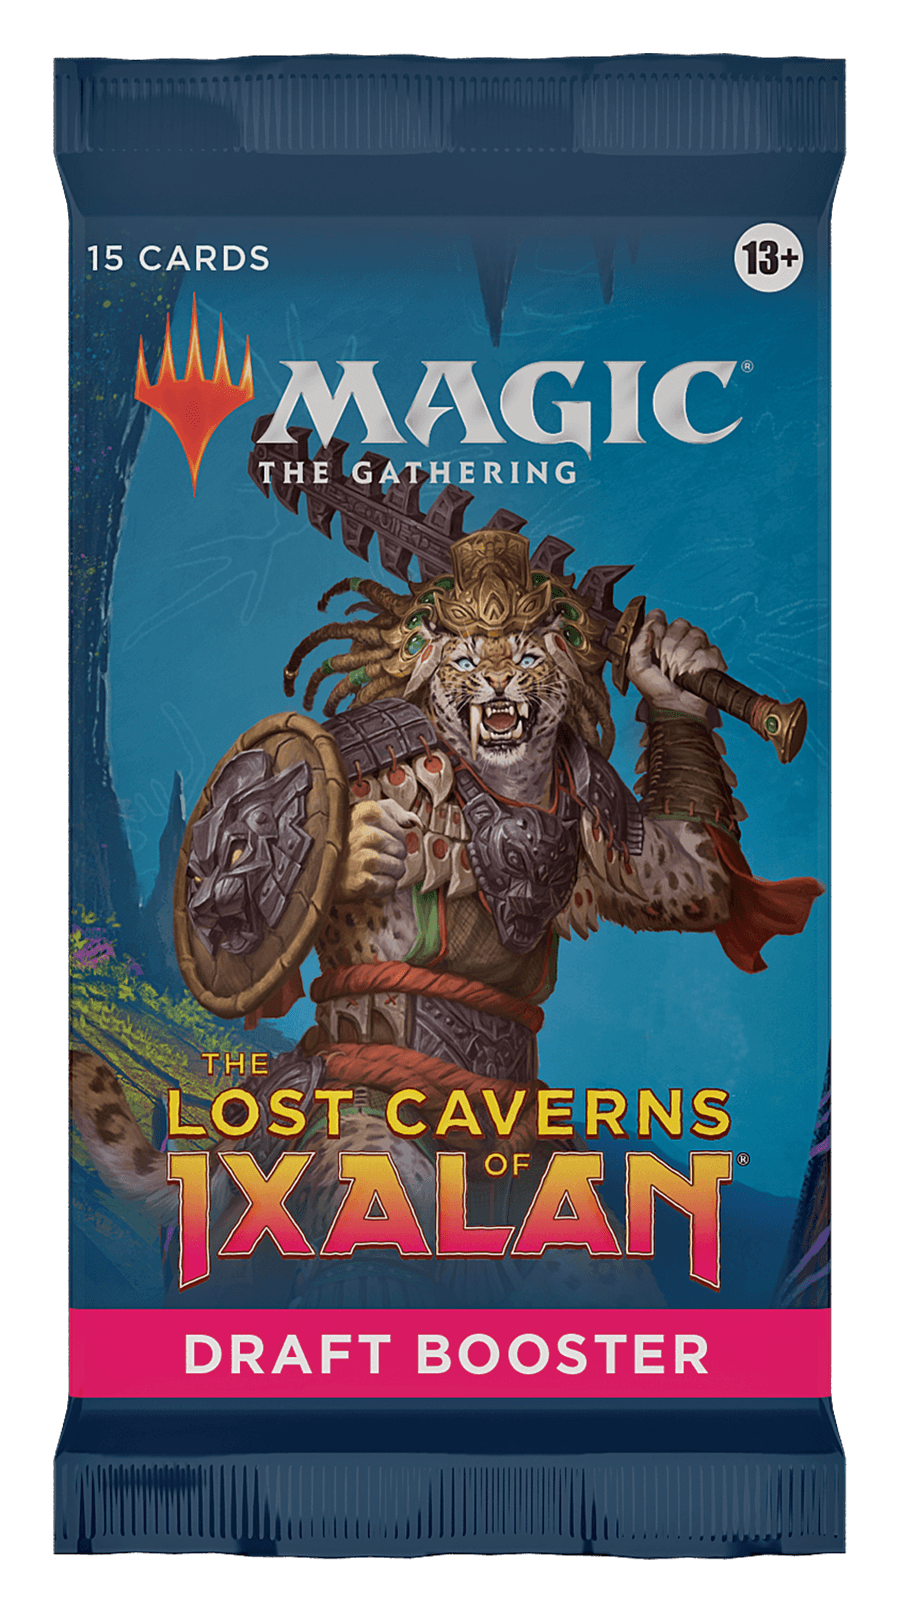 Magic: The Gathering - The Lost Caverns of Ixalan - Draft Booster Pack